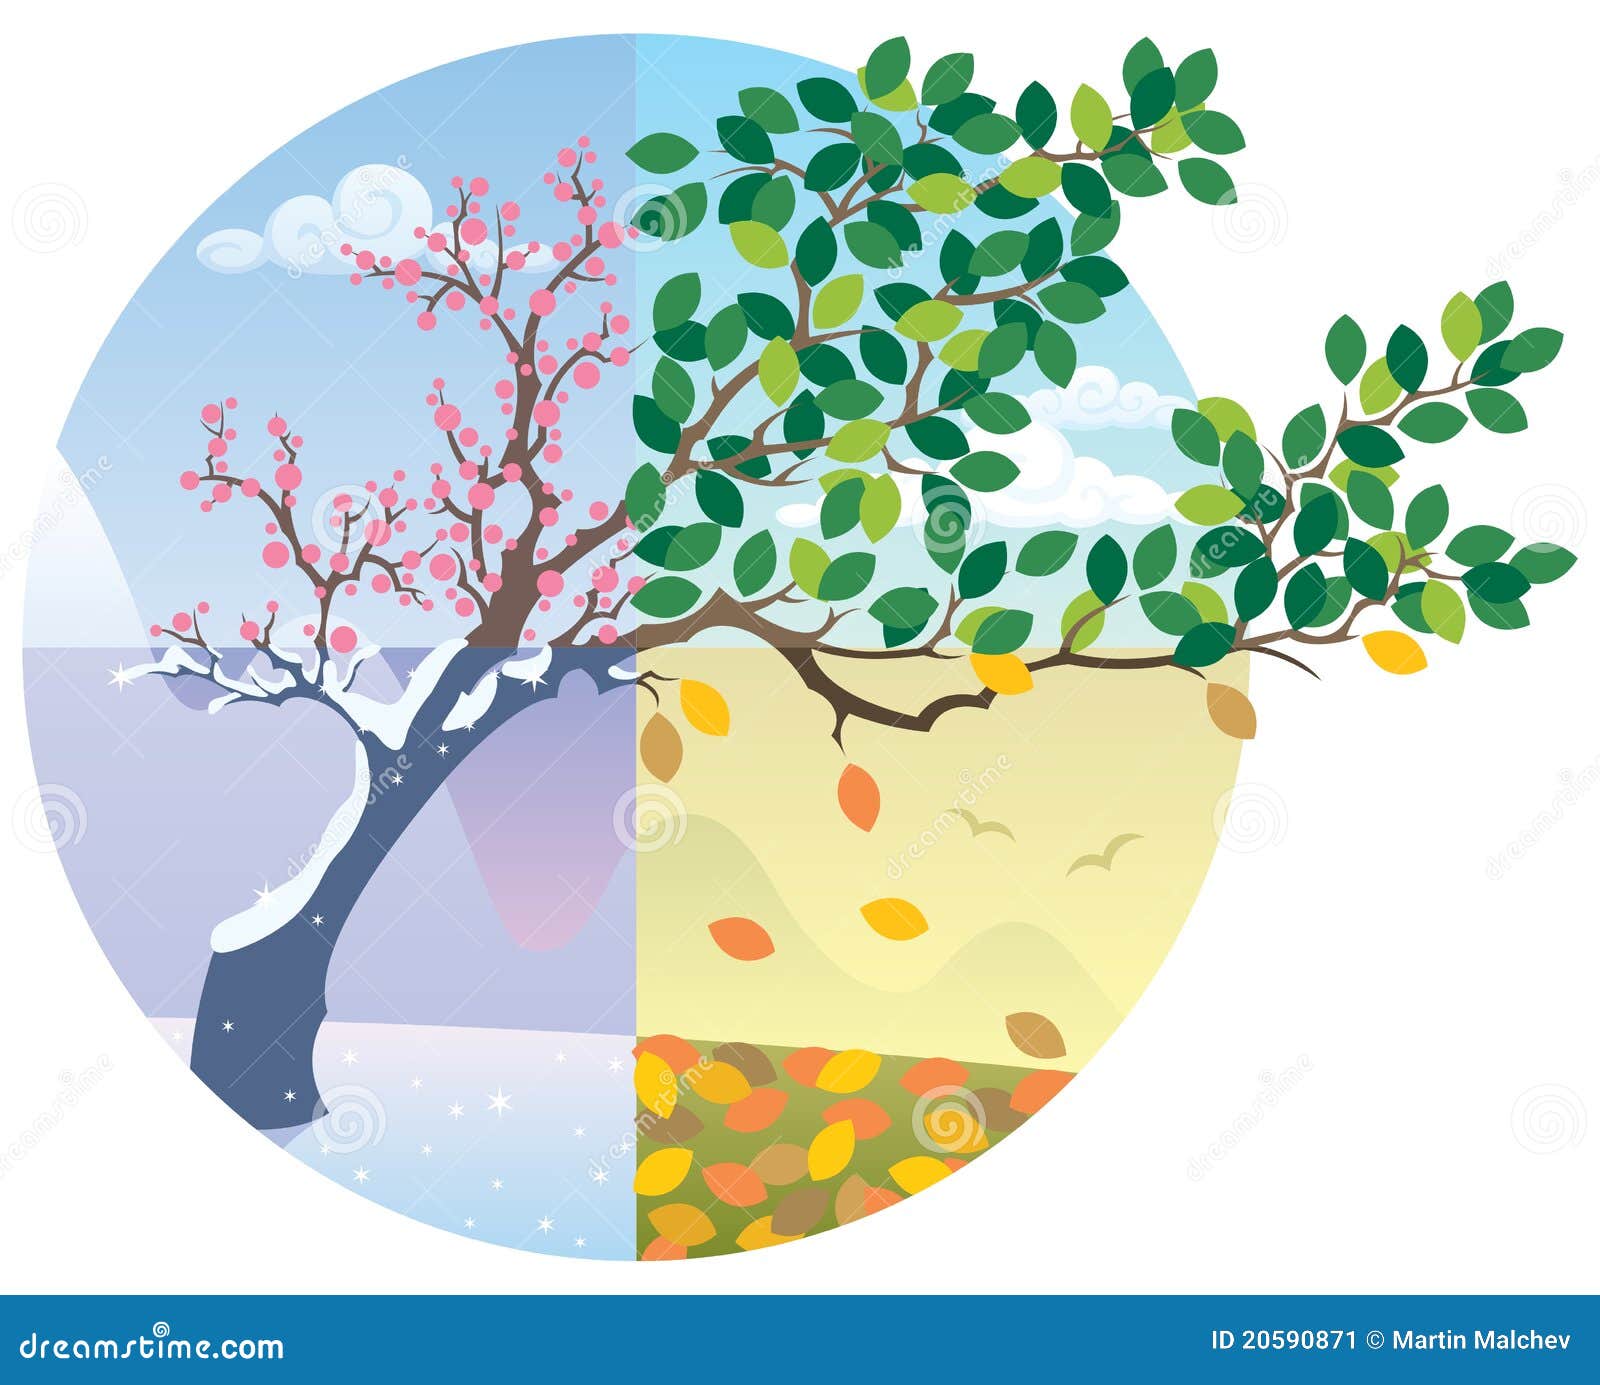 Seasons Cycle stock vector. Illustration of background - 20590871